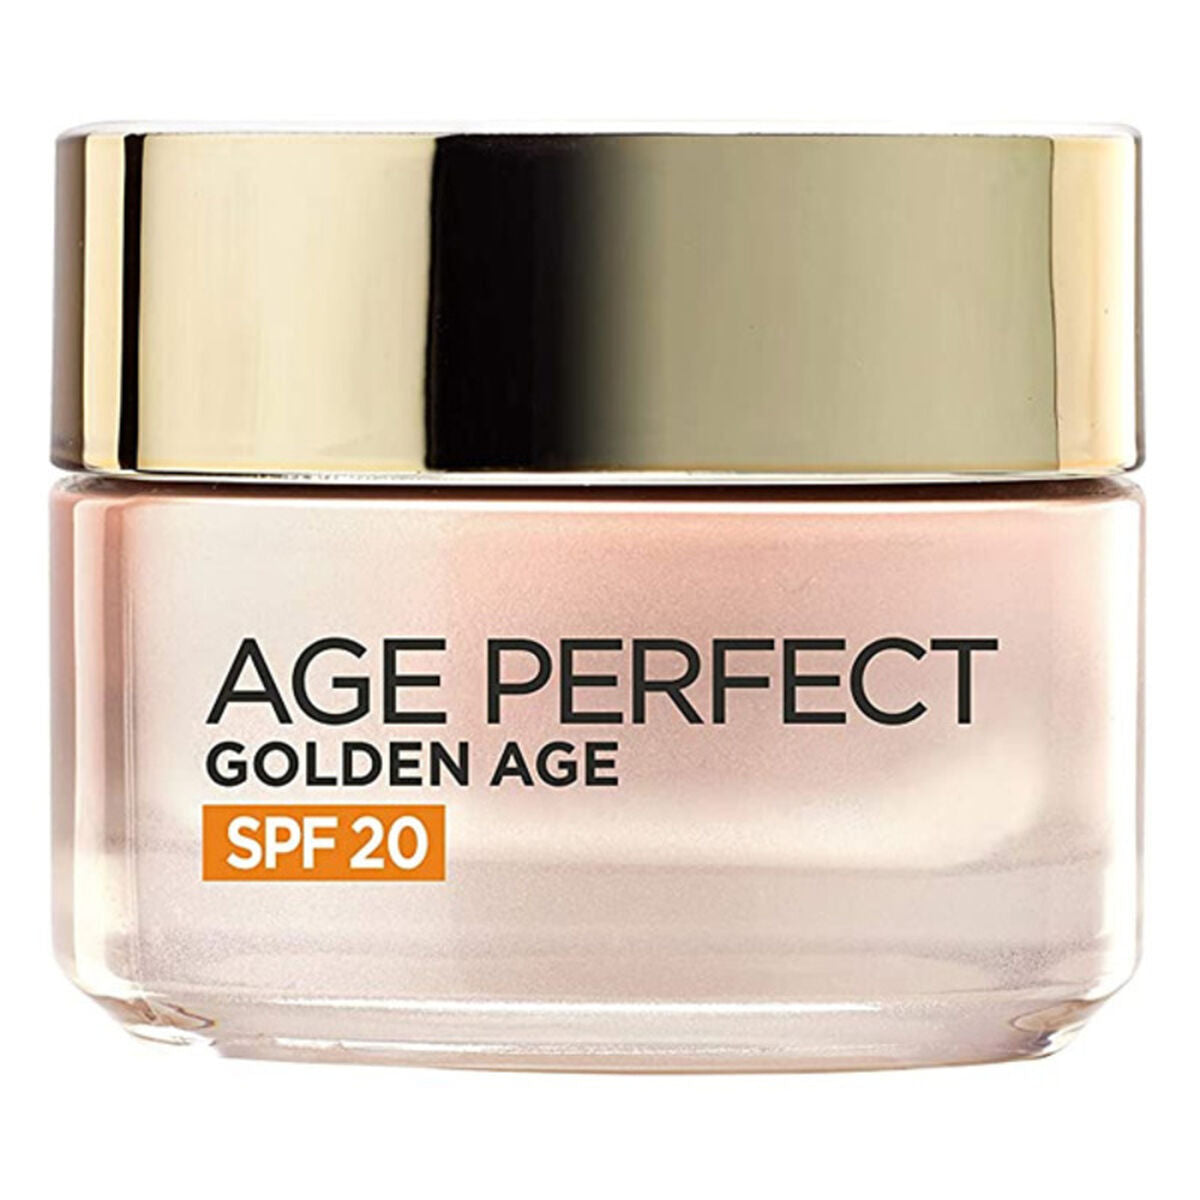 Anti-Wrinkle Cream Golden Age L'Oreal Make Up Age Perfect Golden Age (50 ml) 50 ml | L'Oreal Make Up | Aylal Beauty